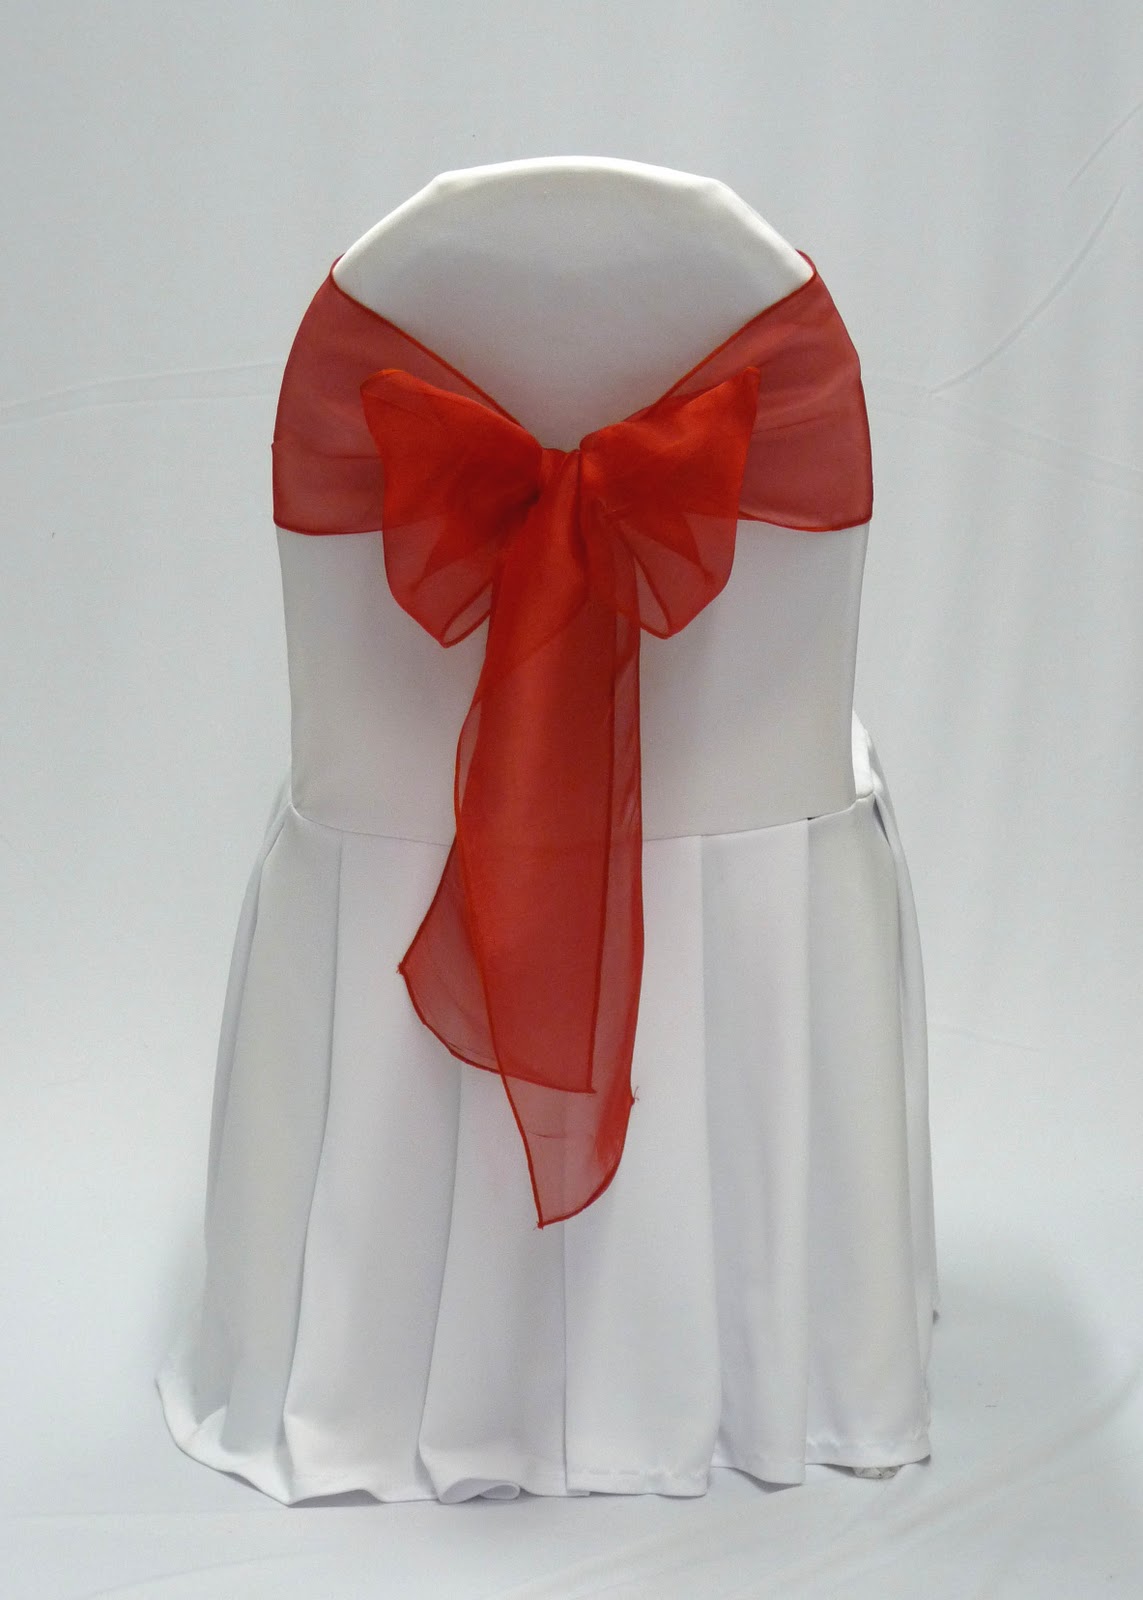 RED SASH TIE ORGANZA CHAIR COVER WHITE RENT 